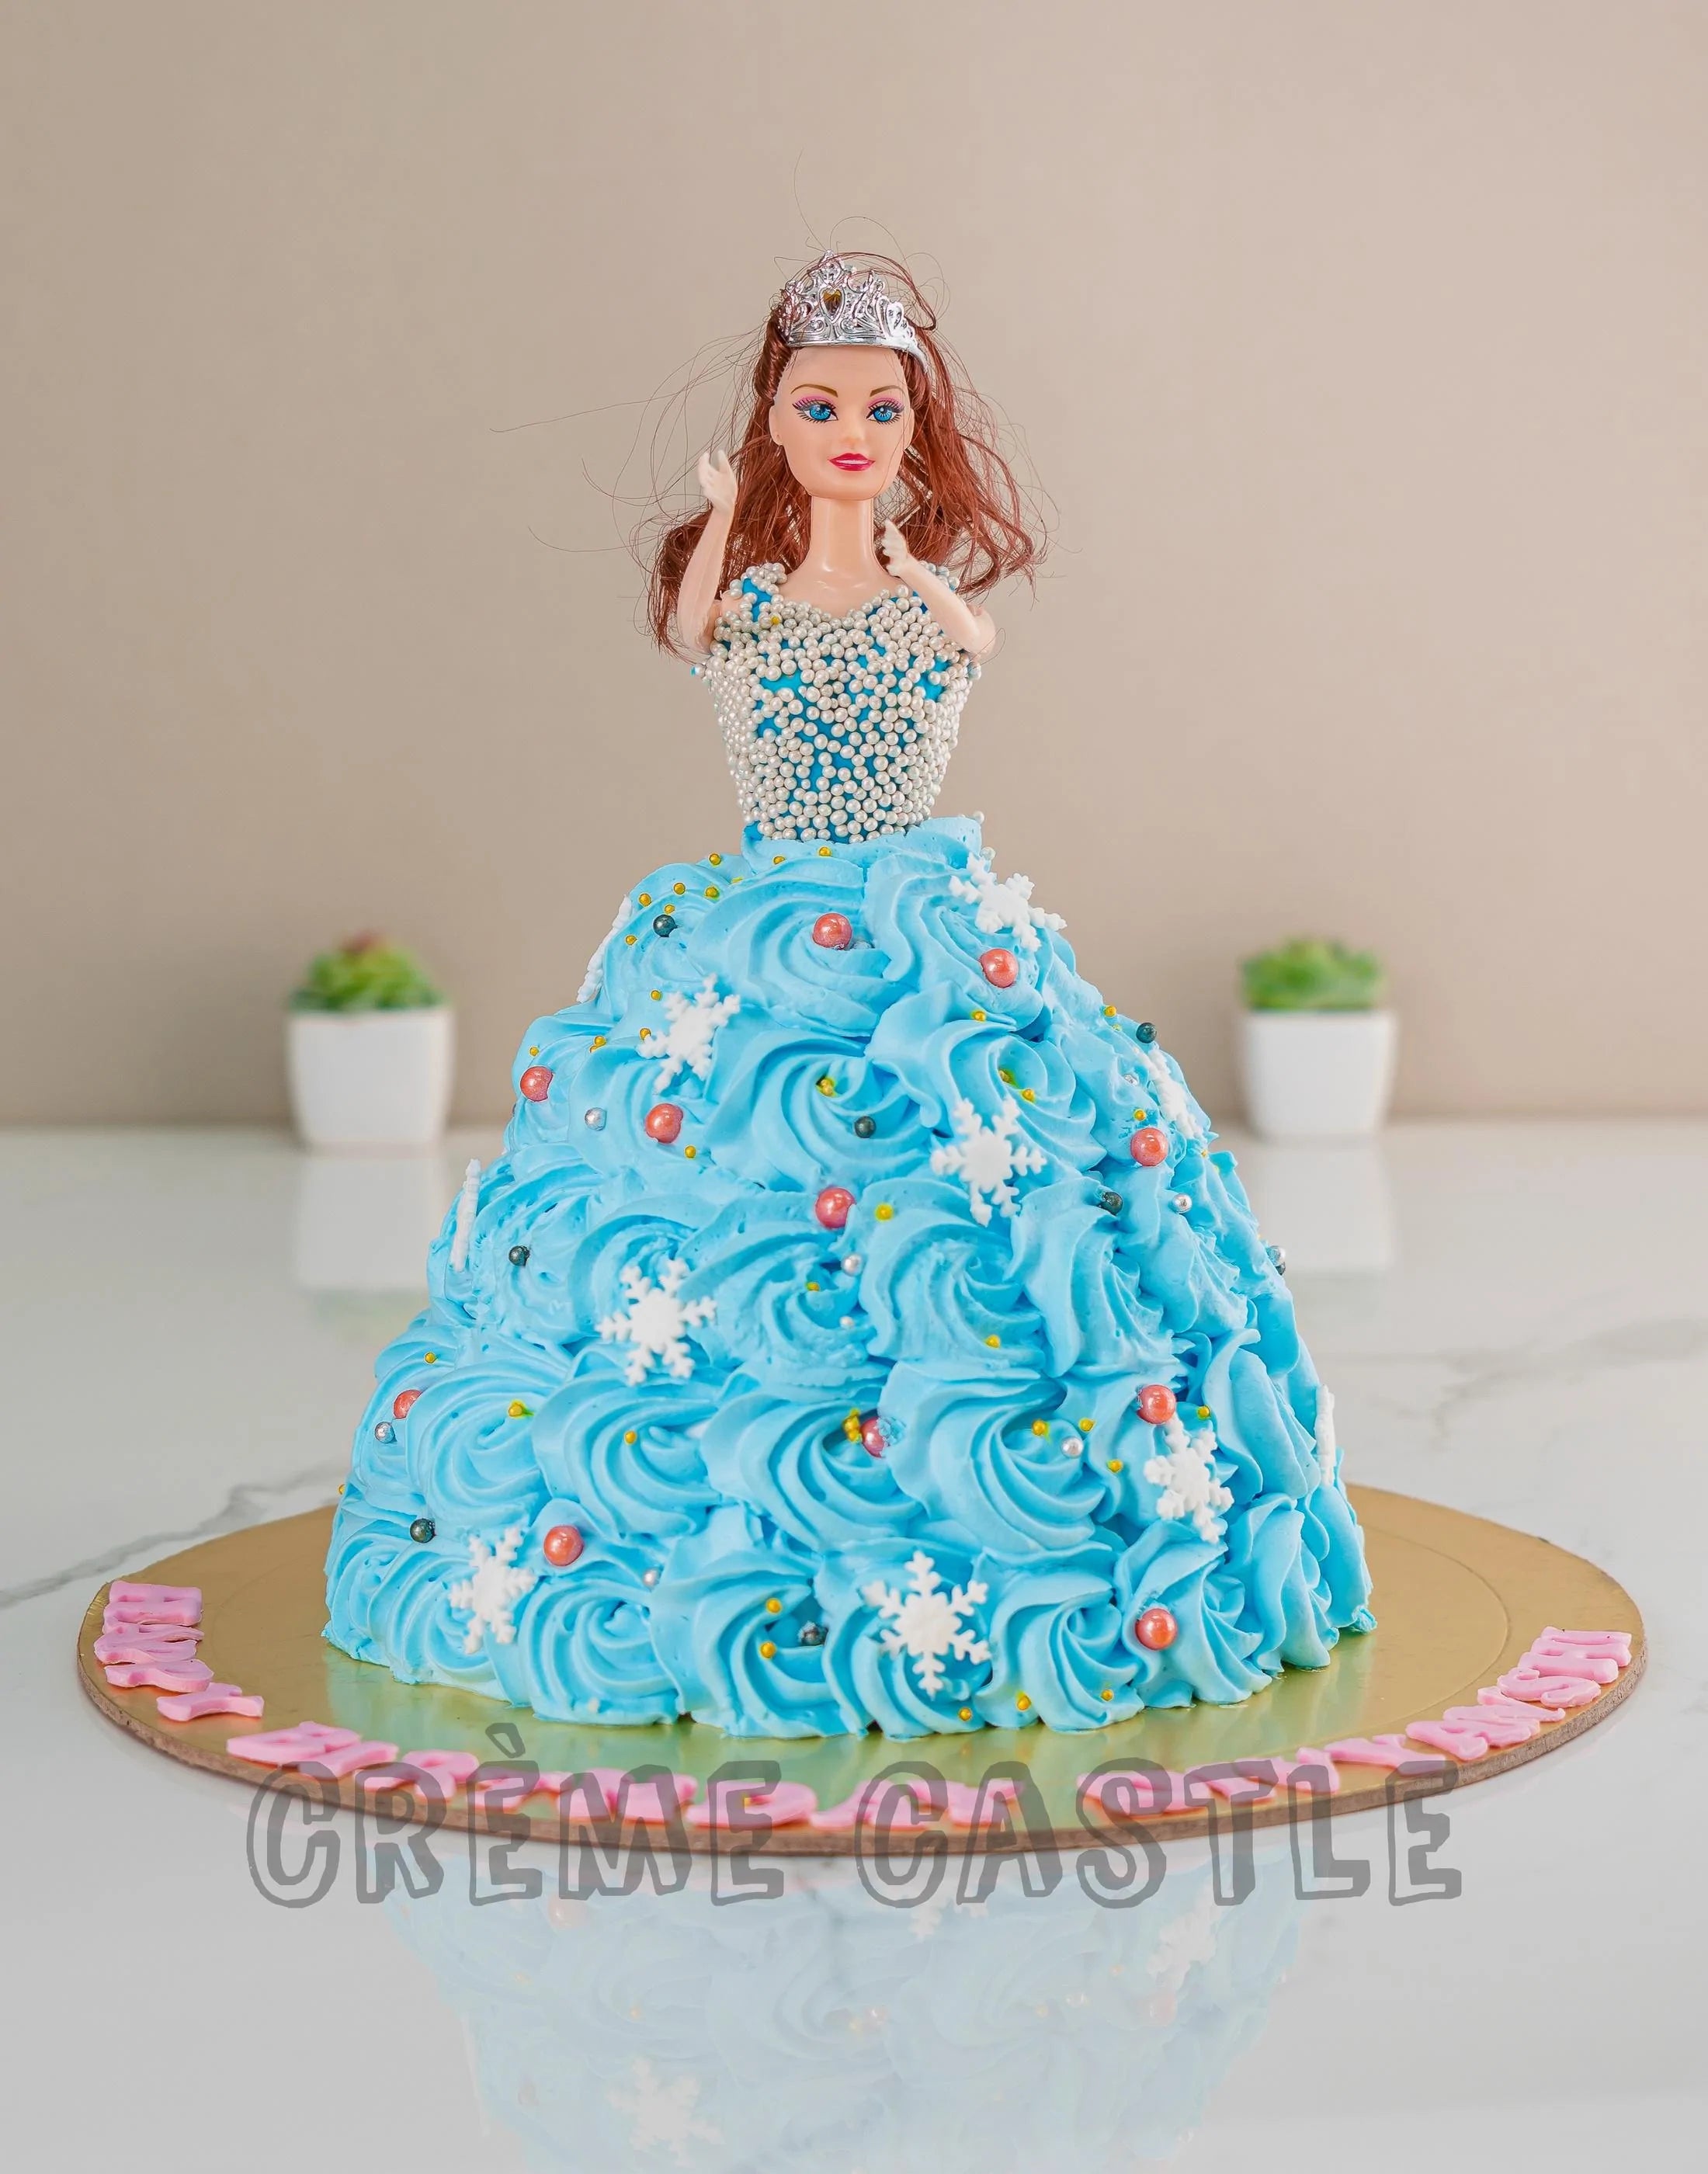 Share more than 68 barbie doll picture cake best